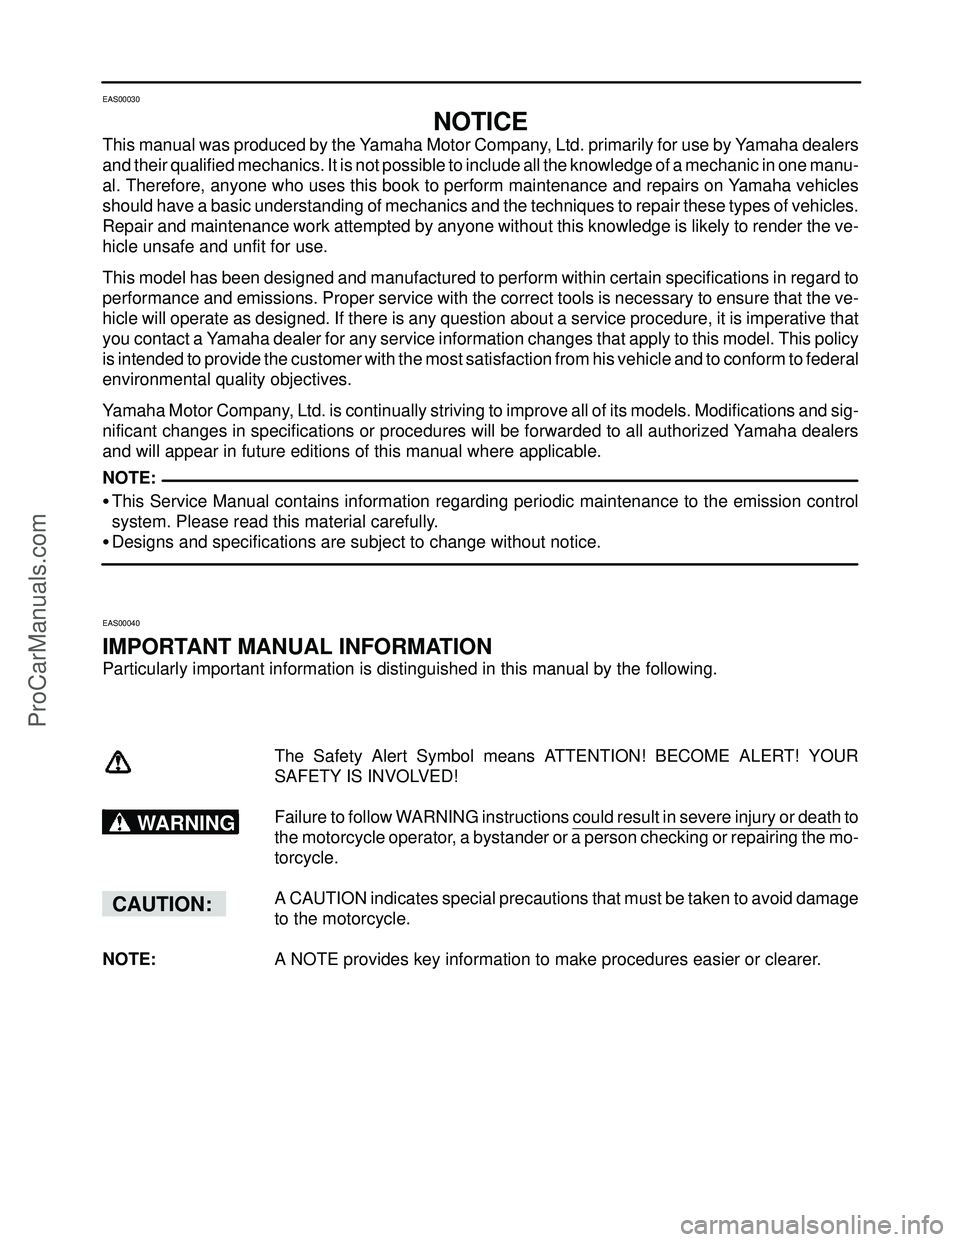 YAMAHA YZF-R1S 2004  Service Manual NOTE:
WARNING
CAUTION:
EAS00030
NOTICE
This manual was produced by the Yamaha Motor Company, Ltd. primarily for use by Yamaha dealers
and their qualified mechanics. It is not possible to include all t